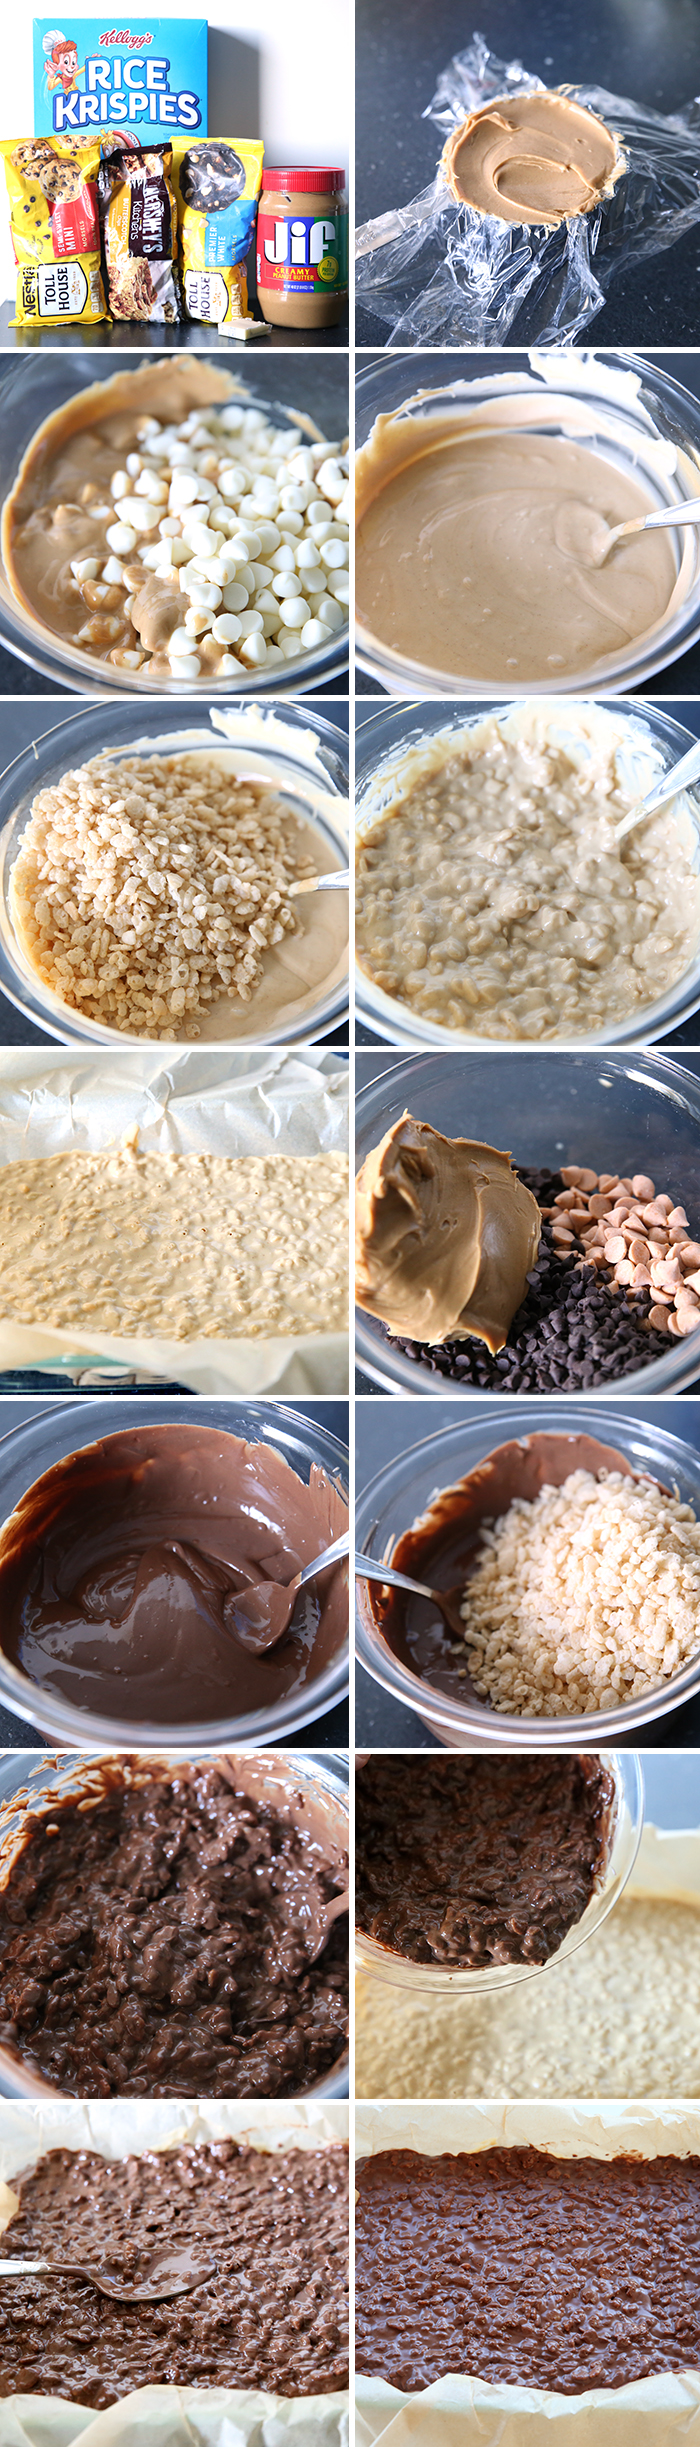 14-photo picture collage of step-by-step photos on how to make No-Bake Chocolate Peanut Butter Crunch Bars.